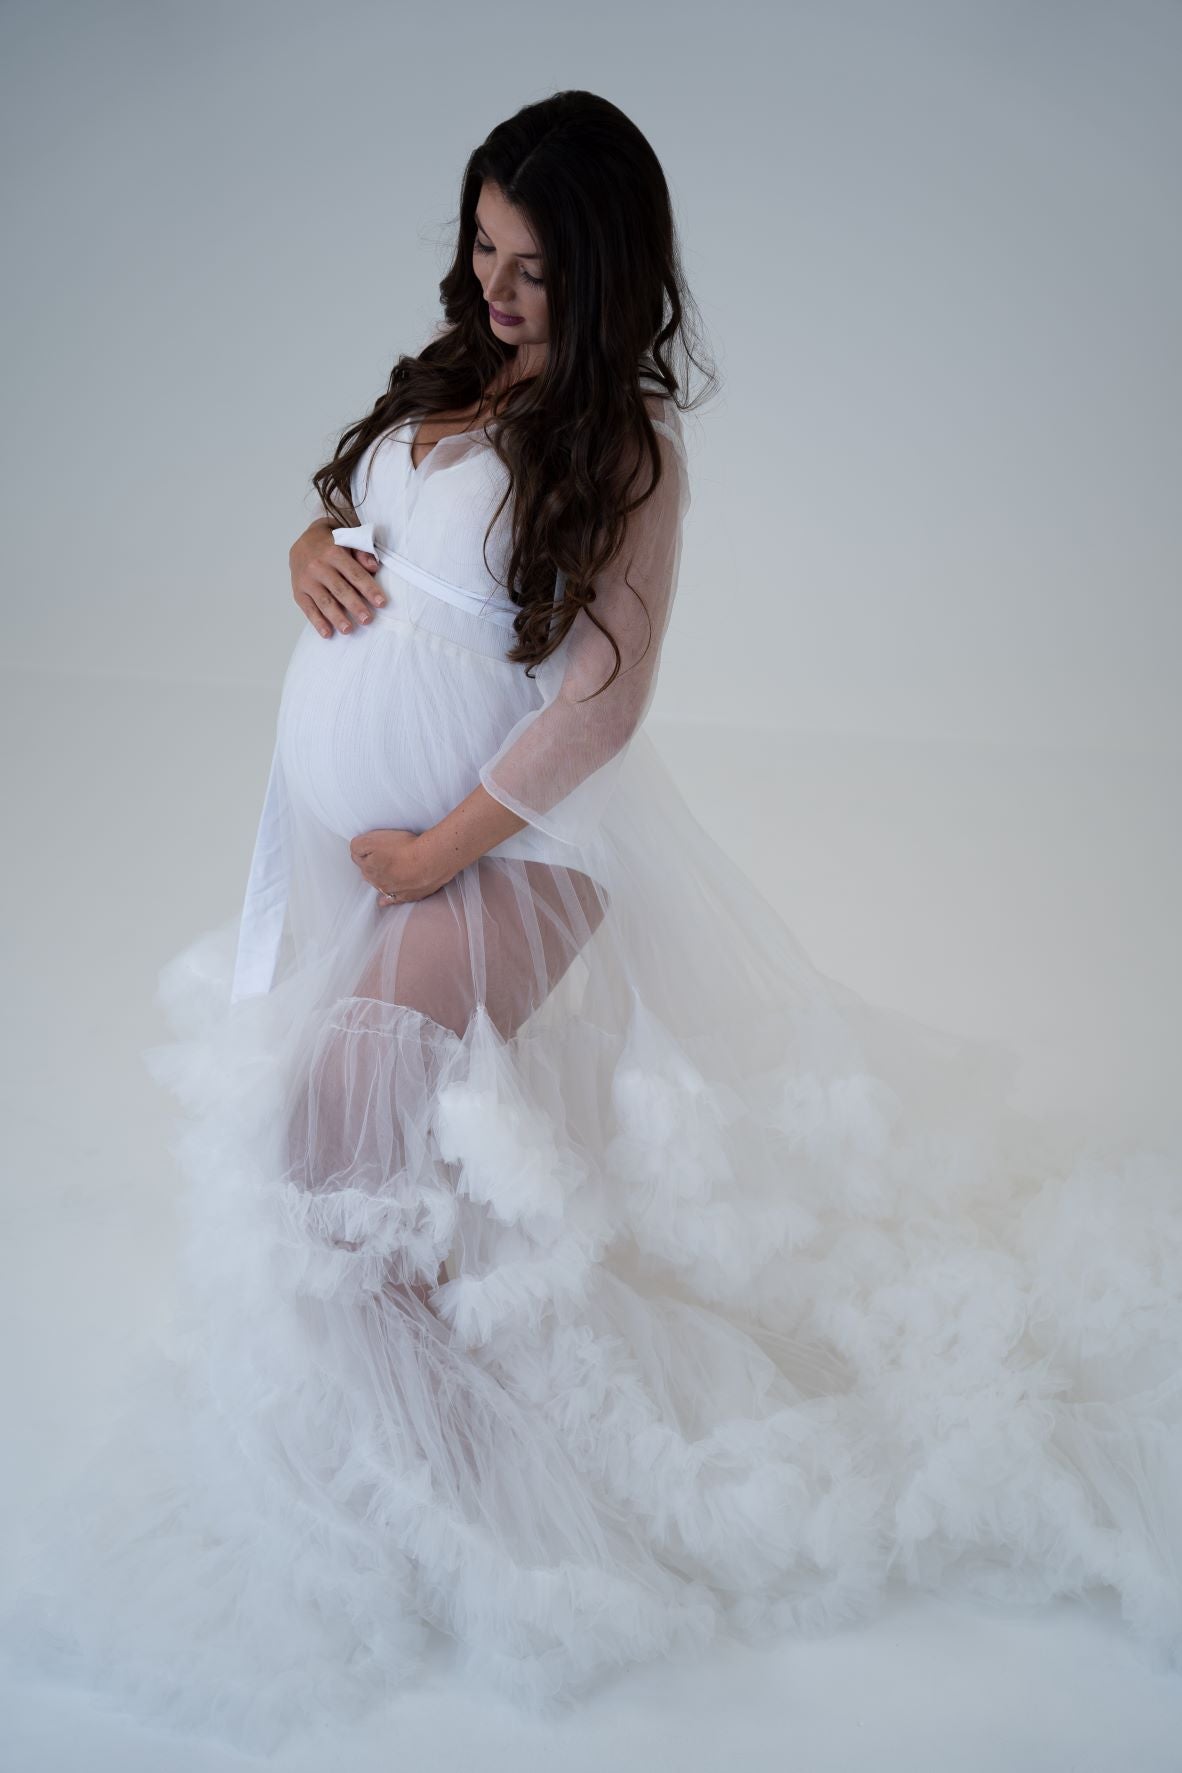 Maternity Photoshoot Dresses - Dream - White Tulle Gown - 4 DAY RENTAL - Luxe Bumps AU